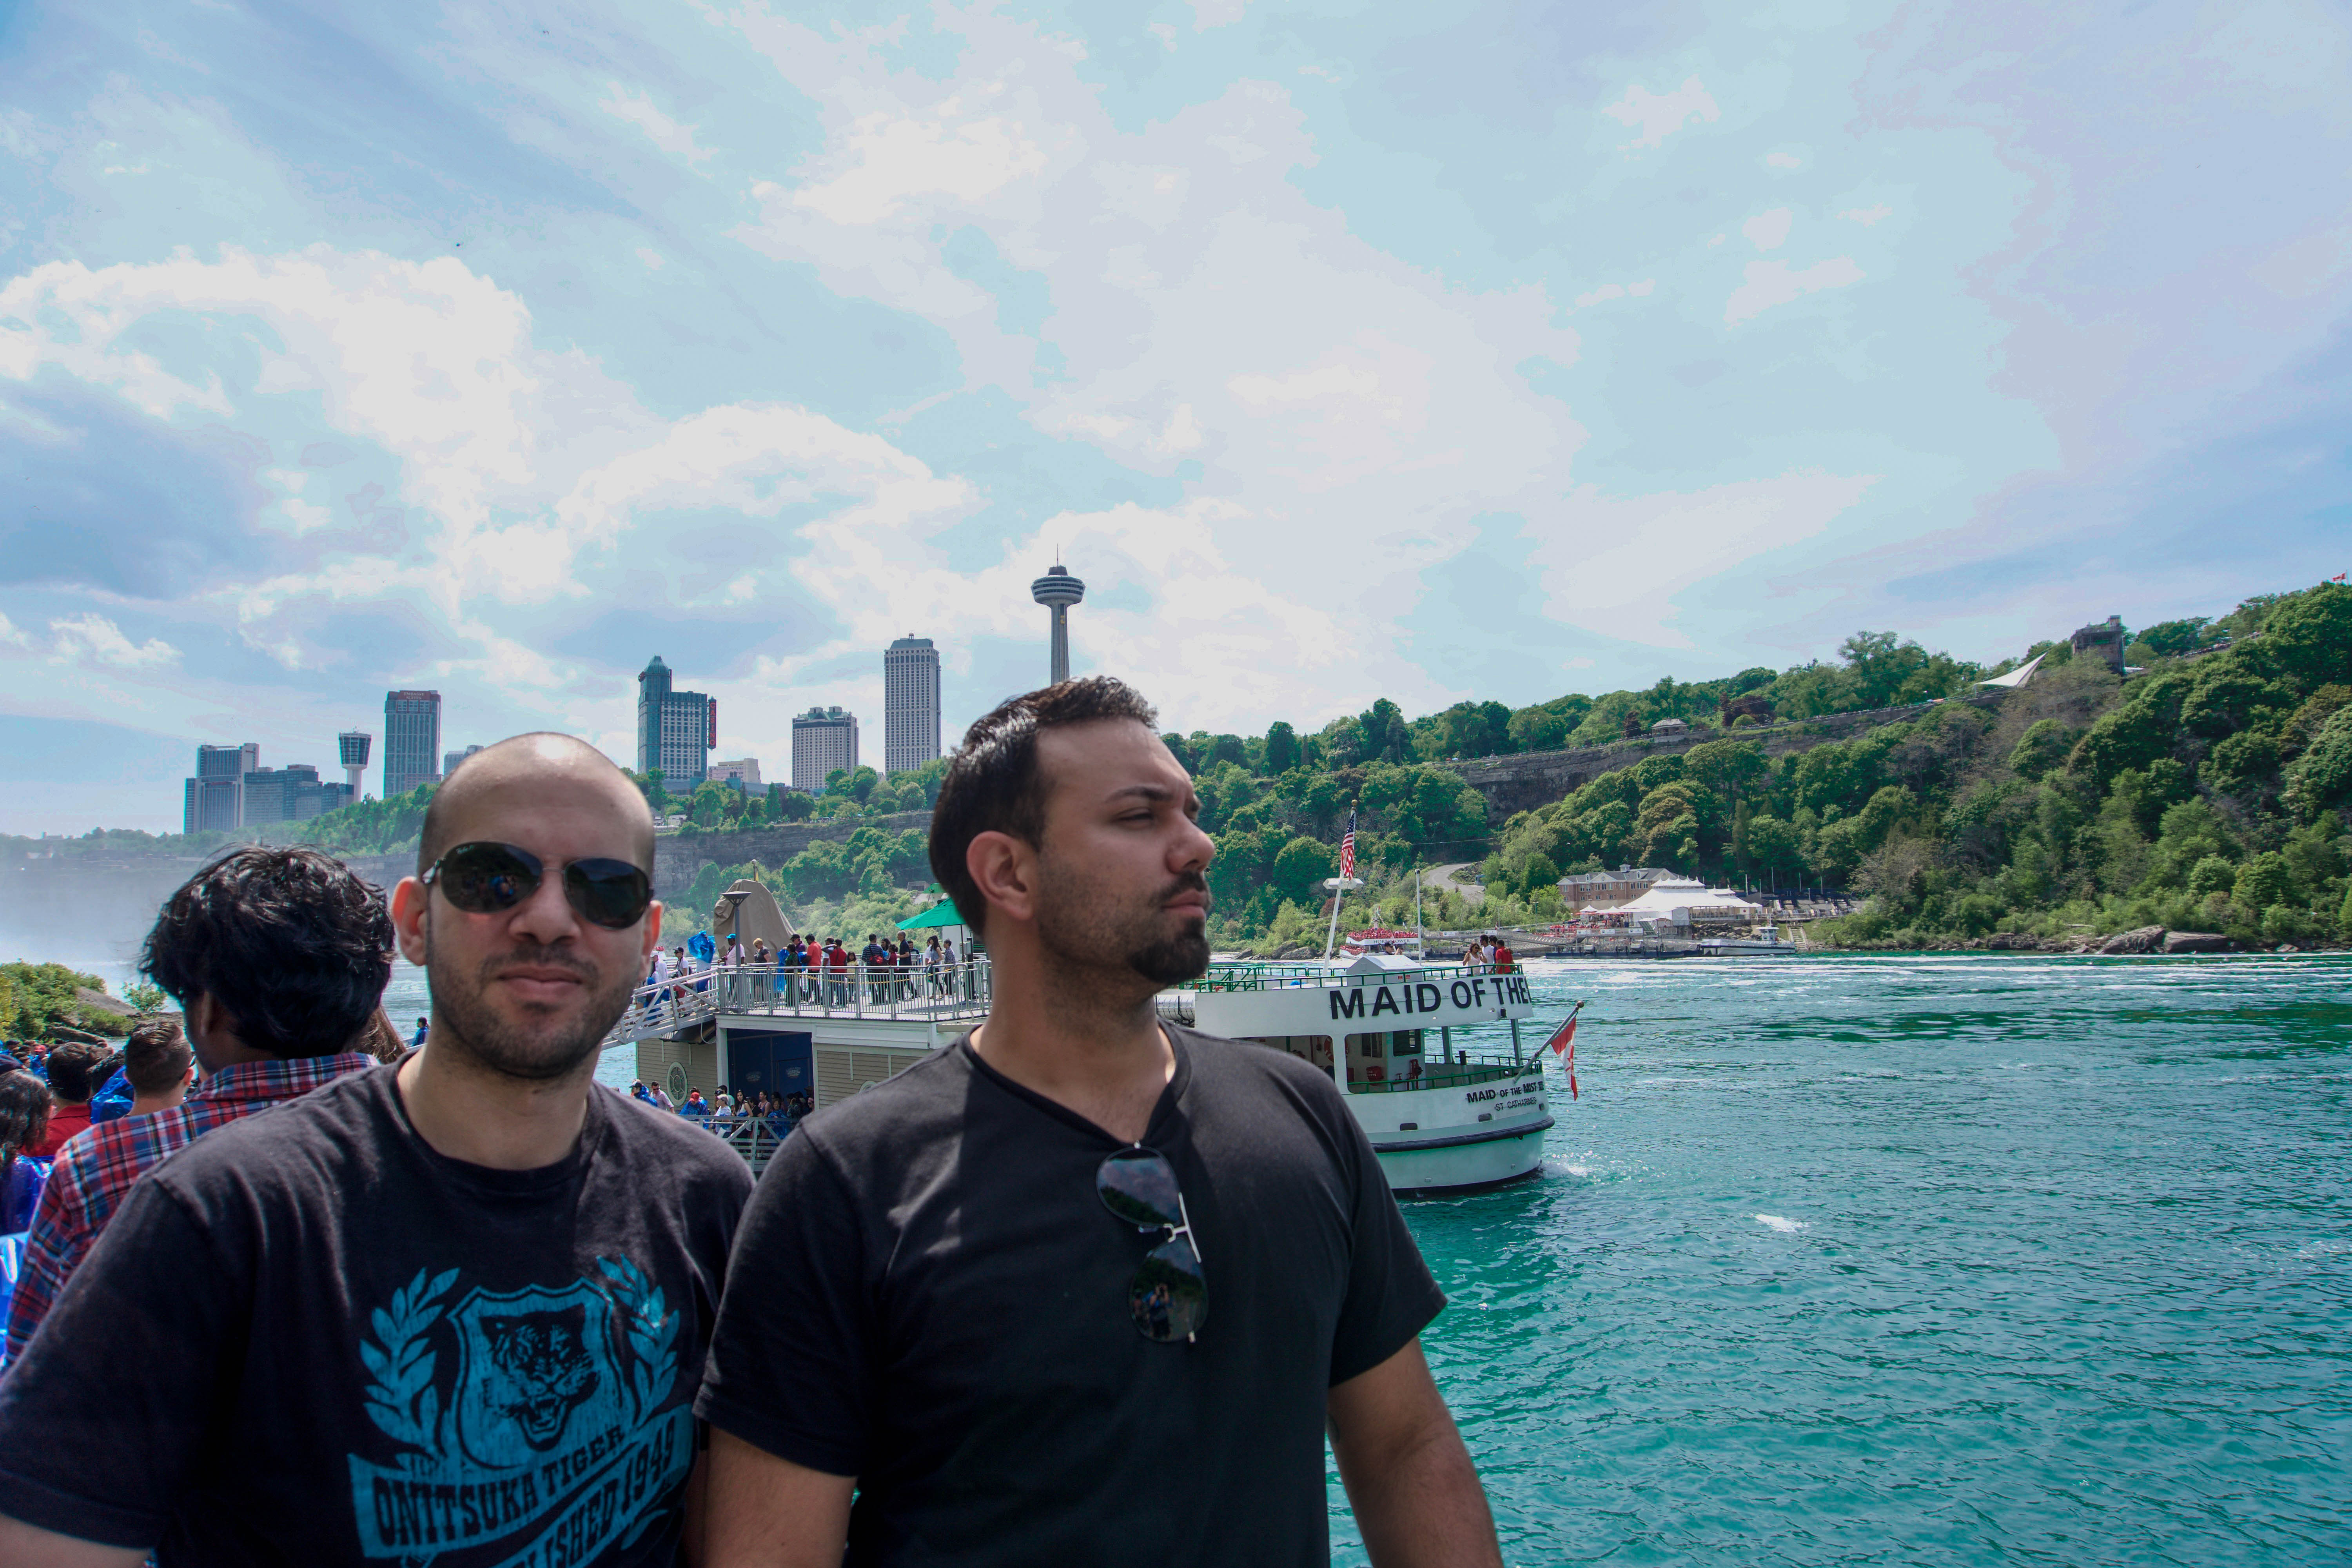 Captains of the Maid of the Mist